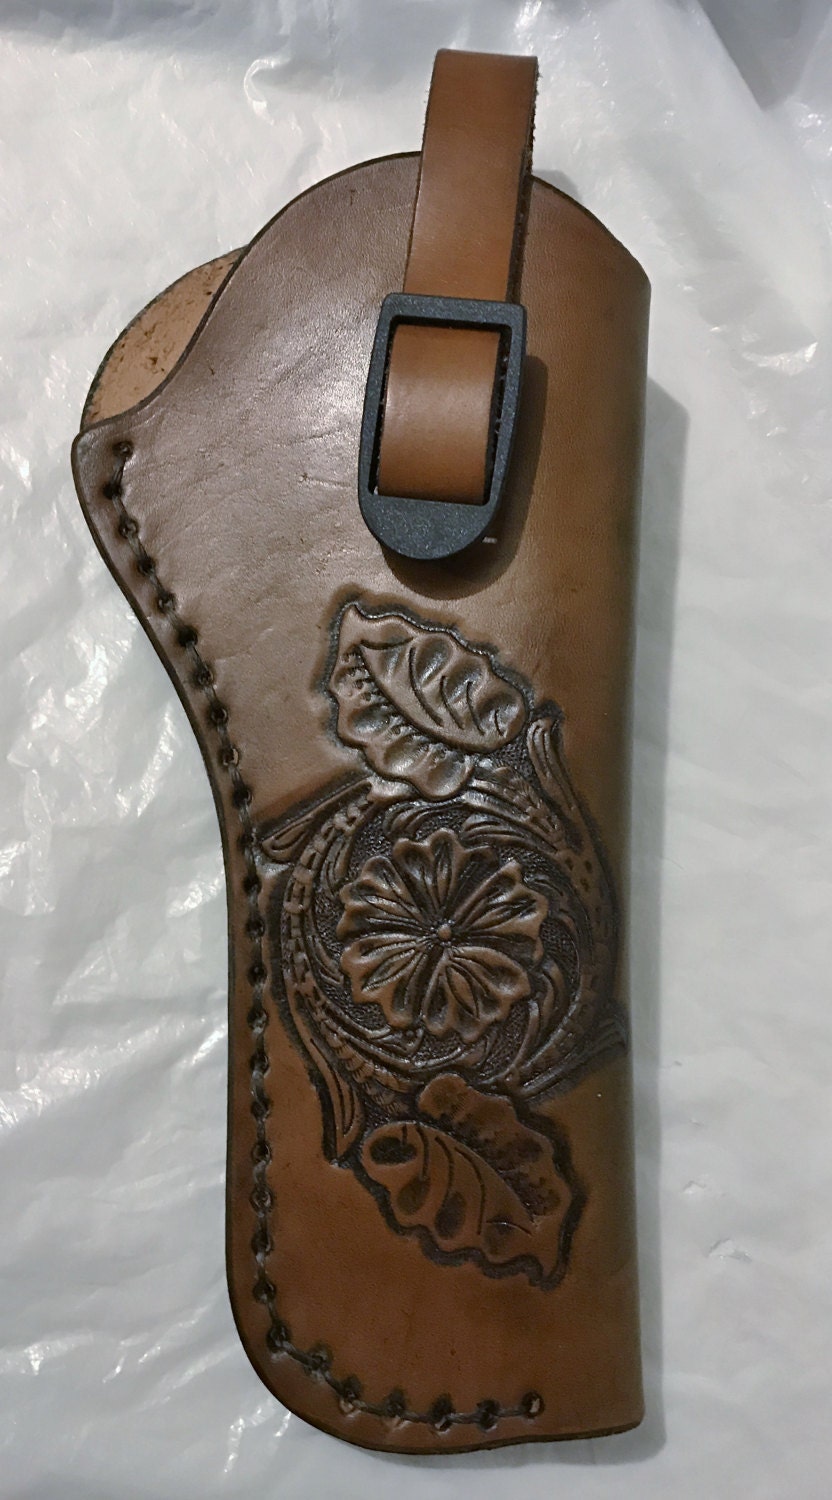 HAND CRAFTED TOOLED LEATHER HOLSTER FITS .38 SPECIAL 2" BARREL AMBIDEXTROUS 